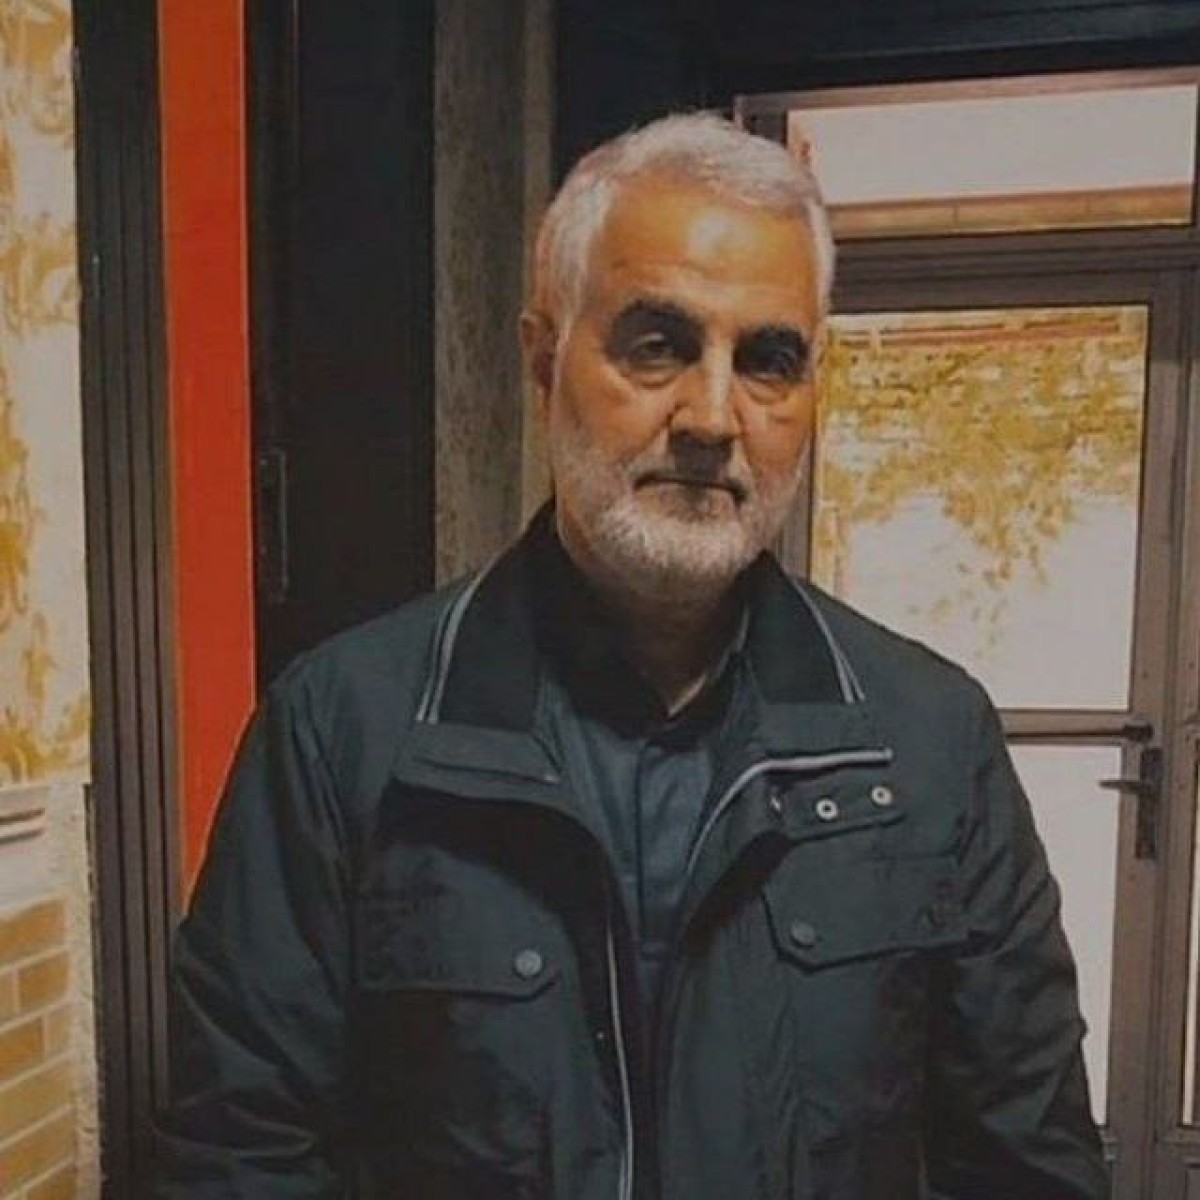  Martyr Soleimani was brave, too, with contrivance